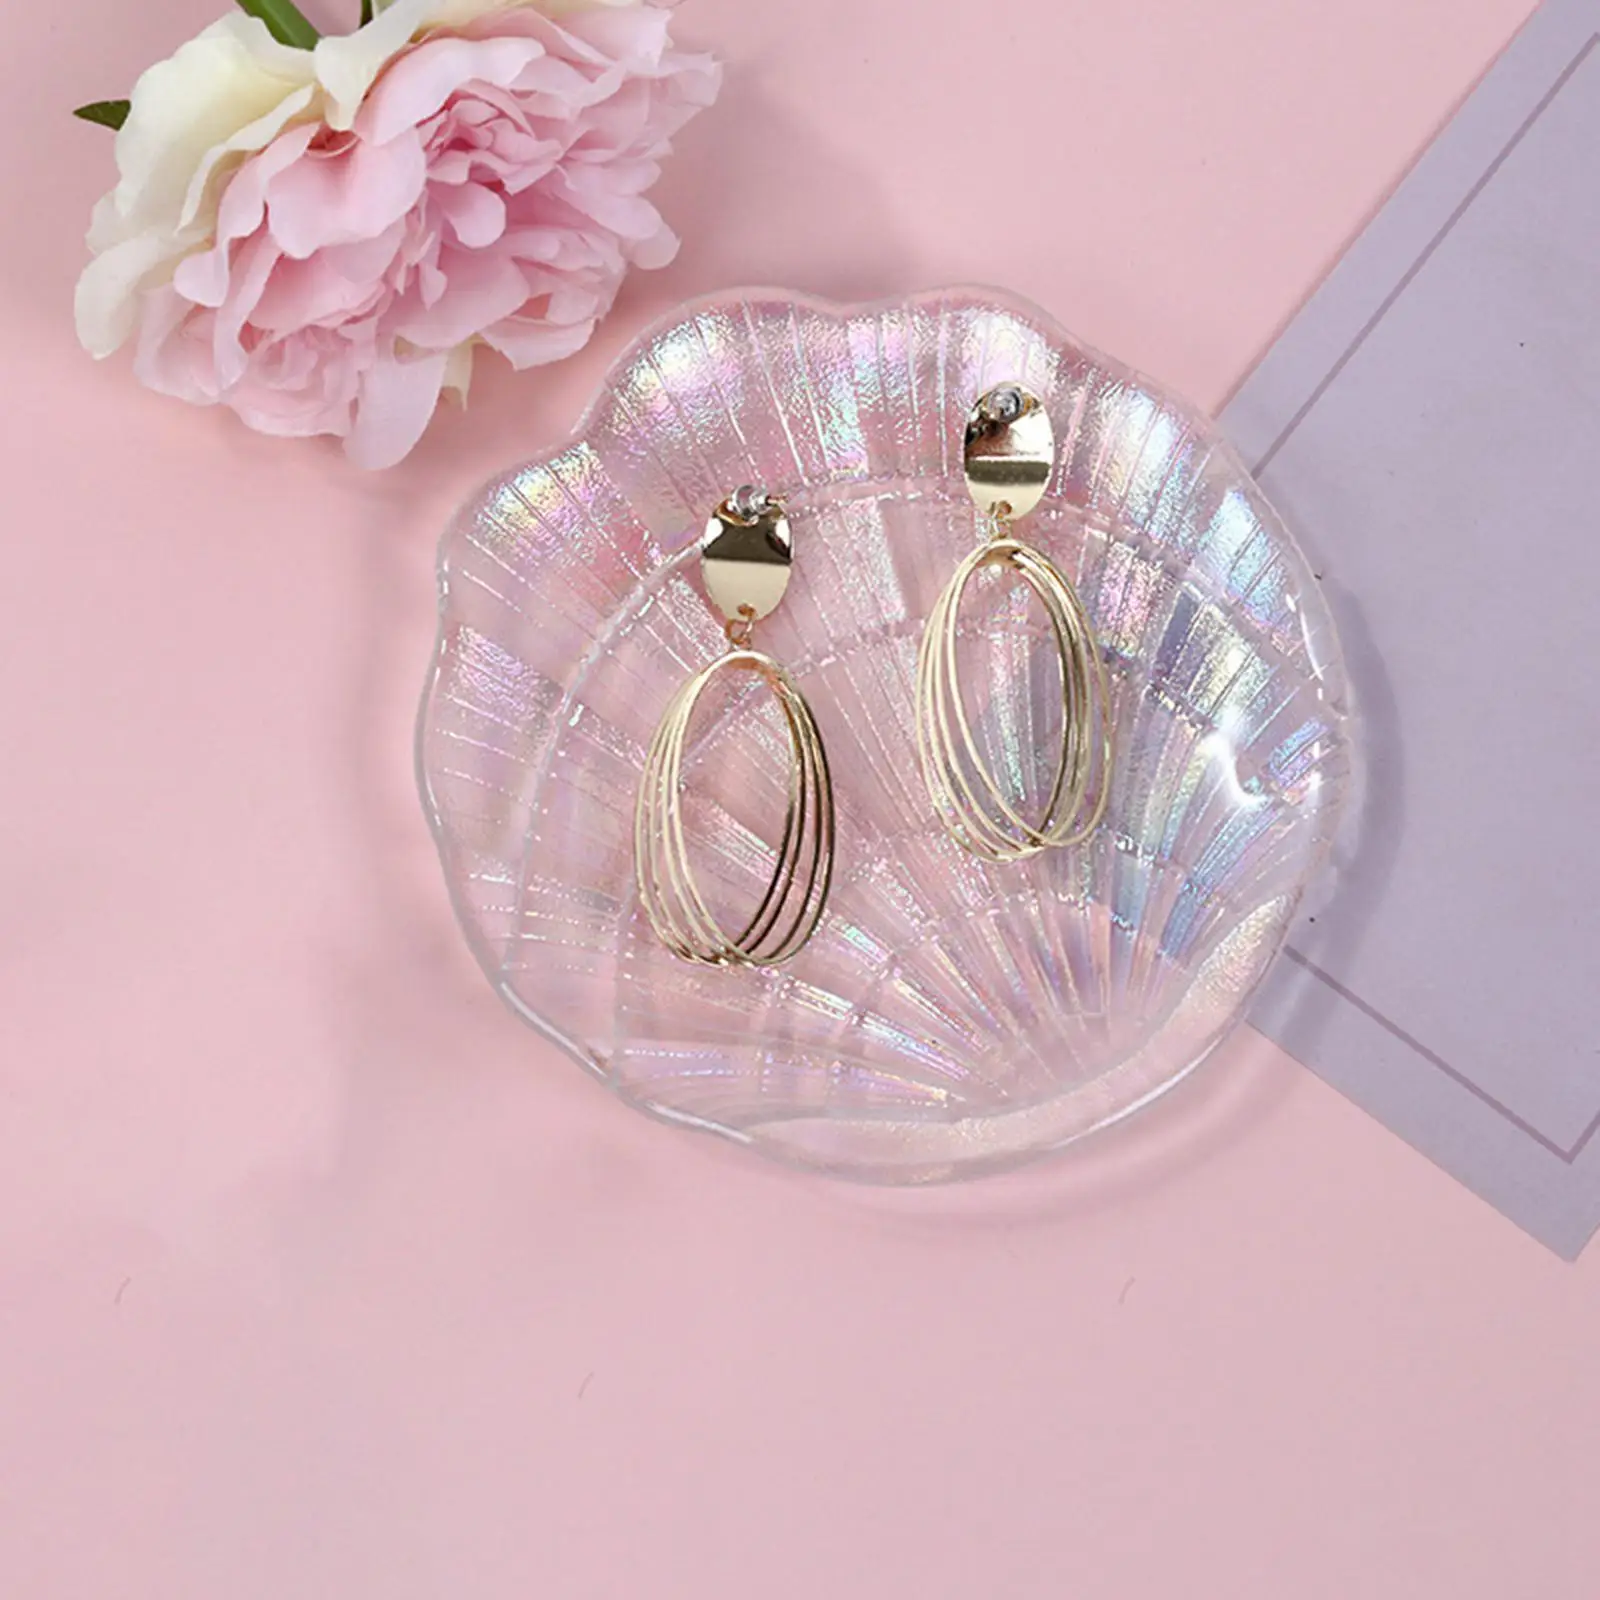 Multifunction Jewelry Storage Tray Glass Plate Small Decorative Shell for Ring Ear Studs Trinket Decoration Candy Storage Holder